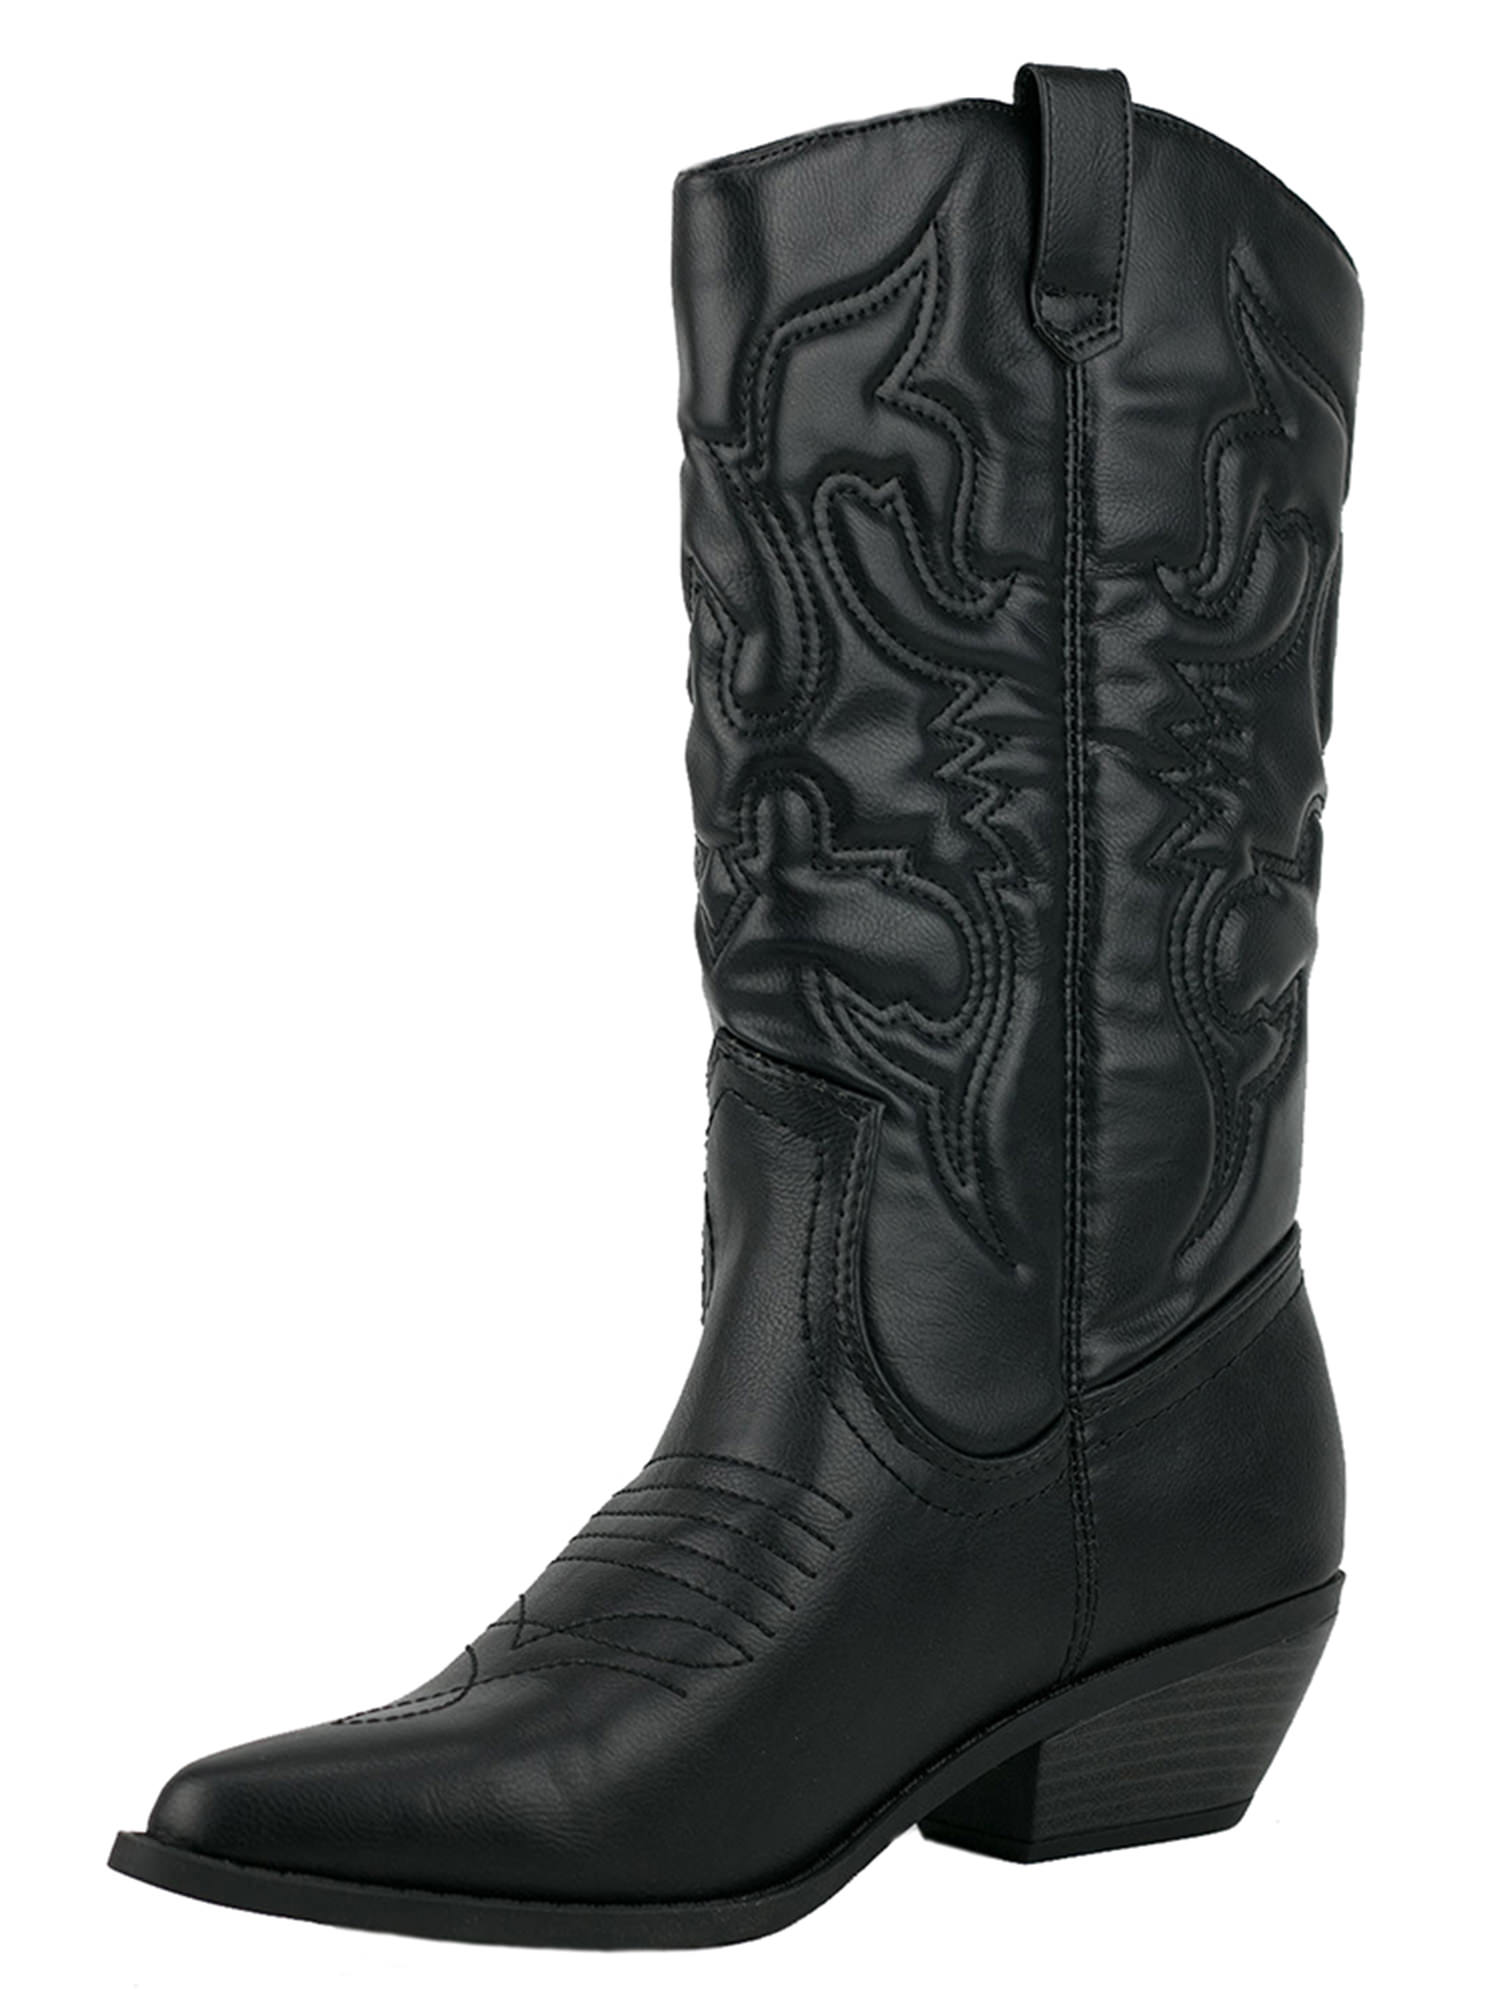 Reno Black Soda Cowboy Western Stitched Boots Women Cowgirl Boots Pointy Toe Knee High - image 1 of 3